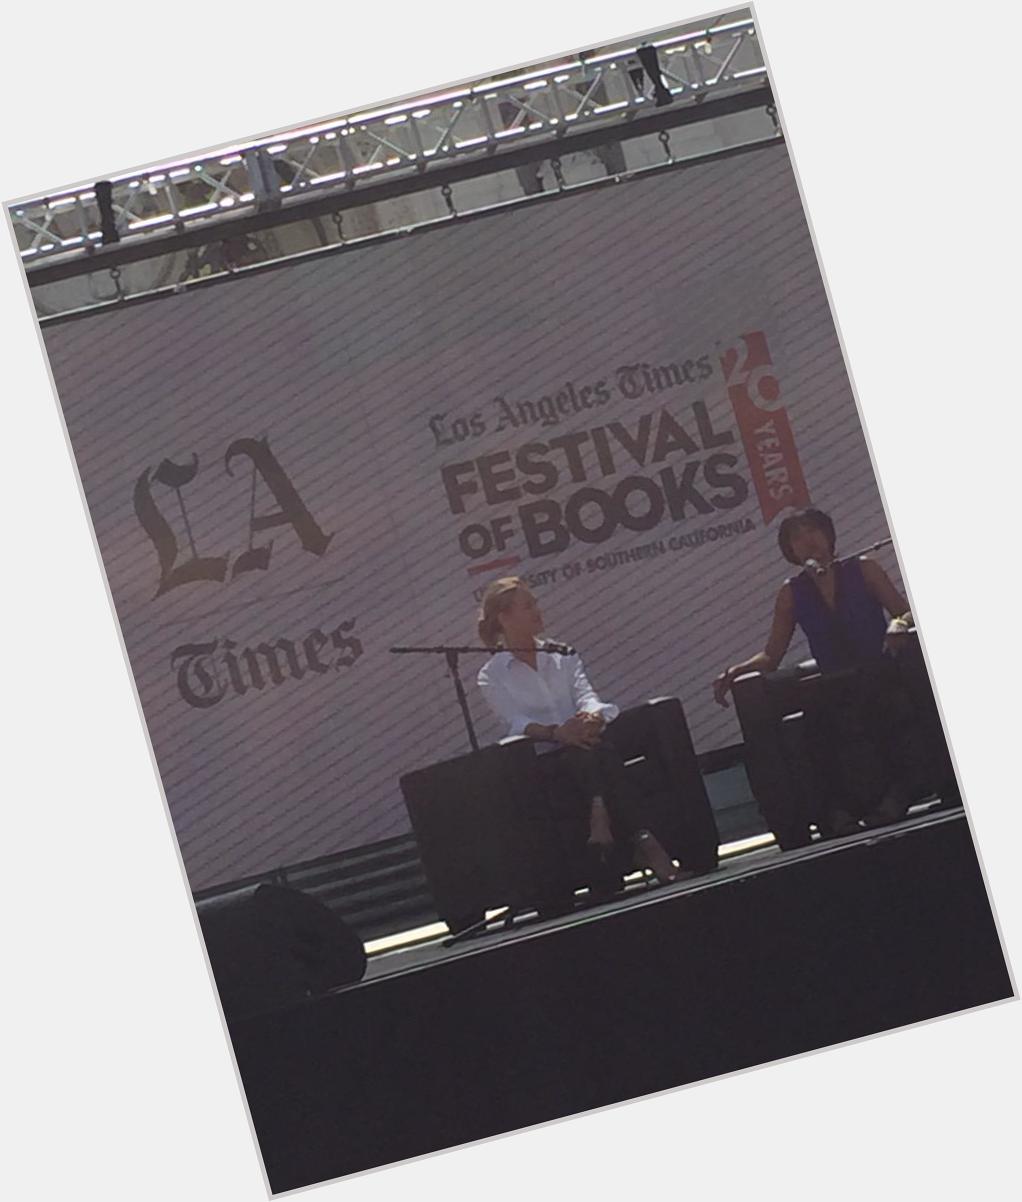 Watching talk about Love is Love at the LA Times Festival of Books. Happy birthday, Maria! 